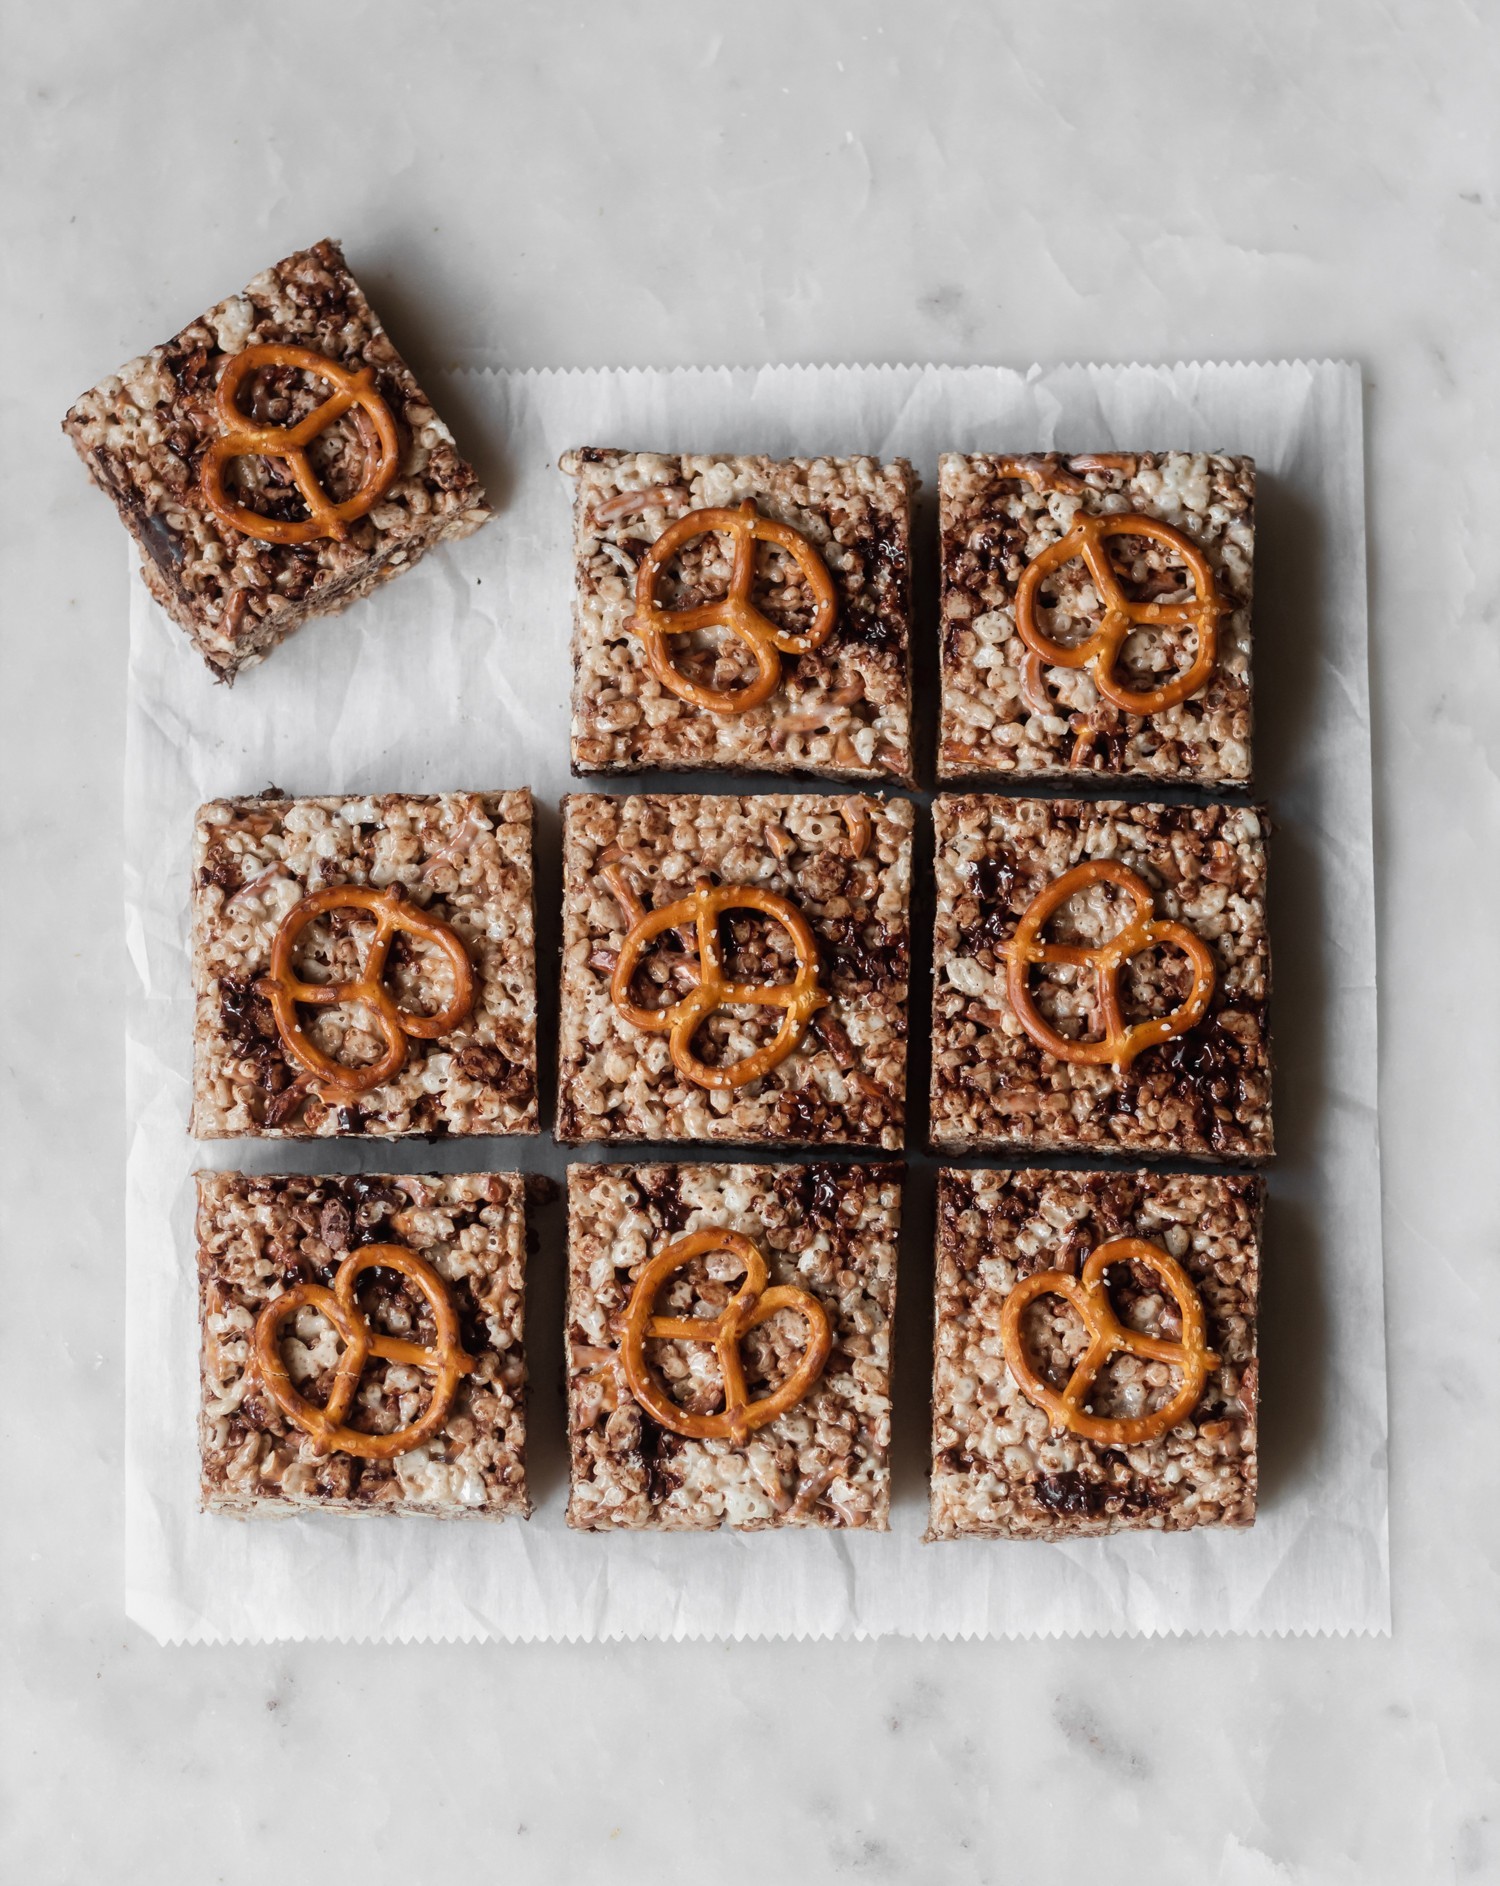 Cut chocolate rice krispie treats with pretzels. One in the left corner is pulled away. Cereal bars are sitting on white parchment paper.